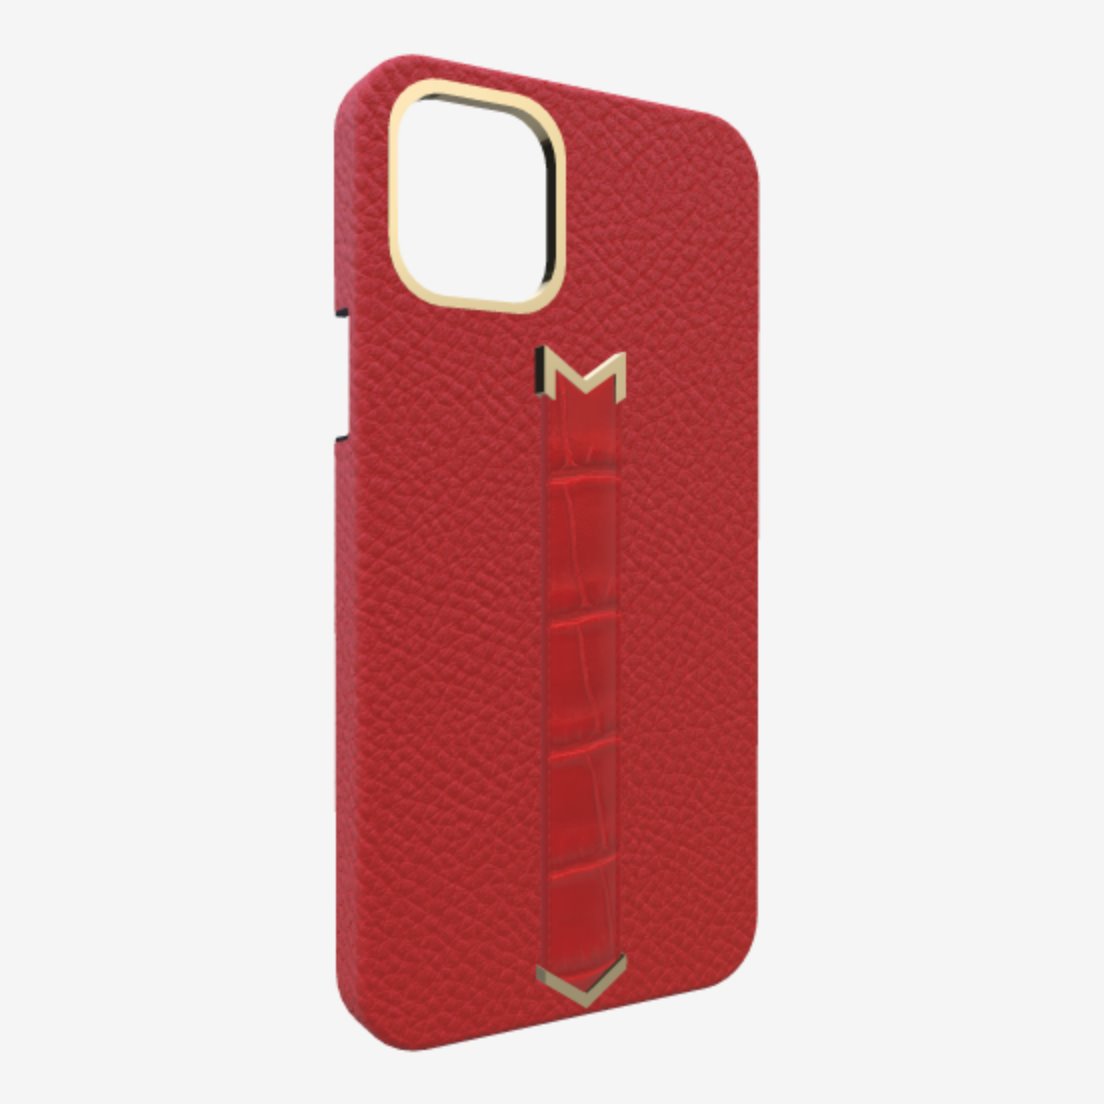 Gold Finger Strap Case for iPhone 13 Pro in Genuine Calfskin and Alligator Glamour Red Glamour Red 